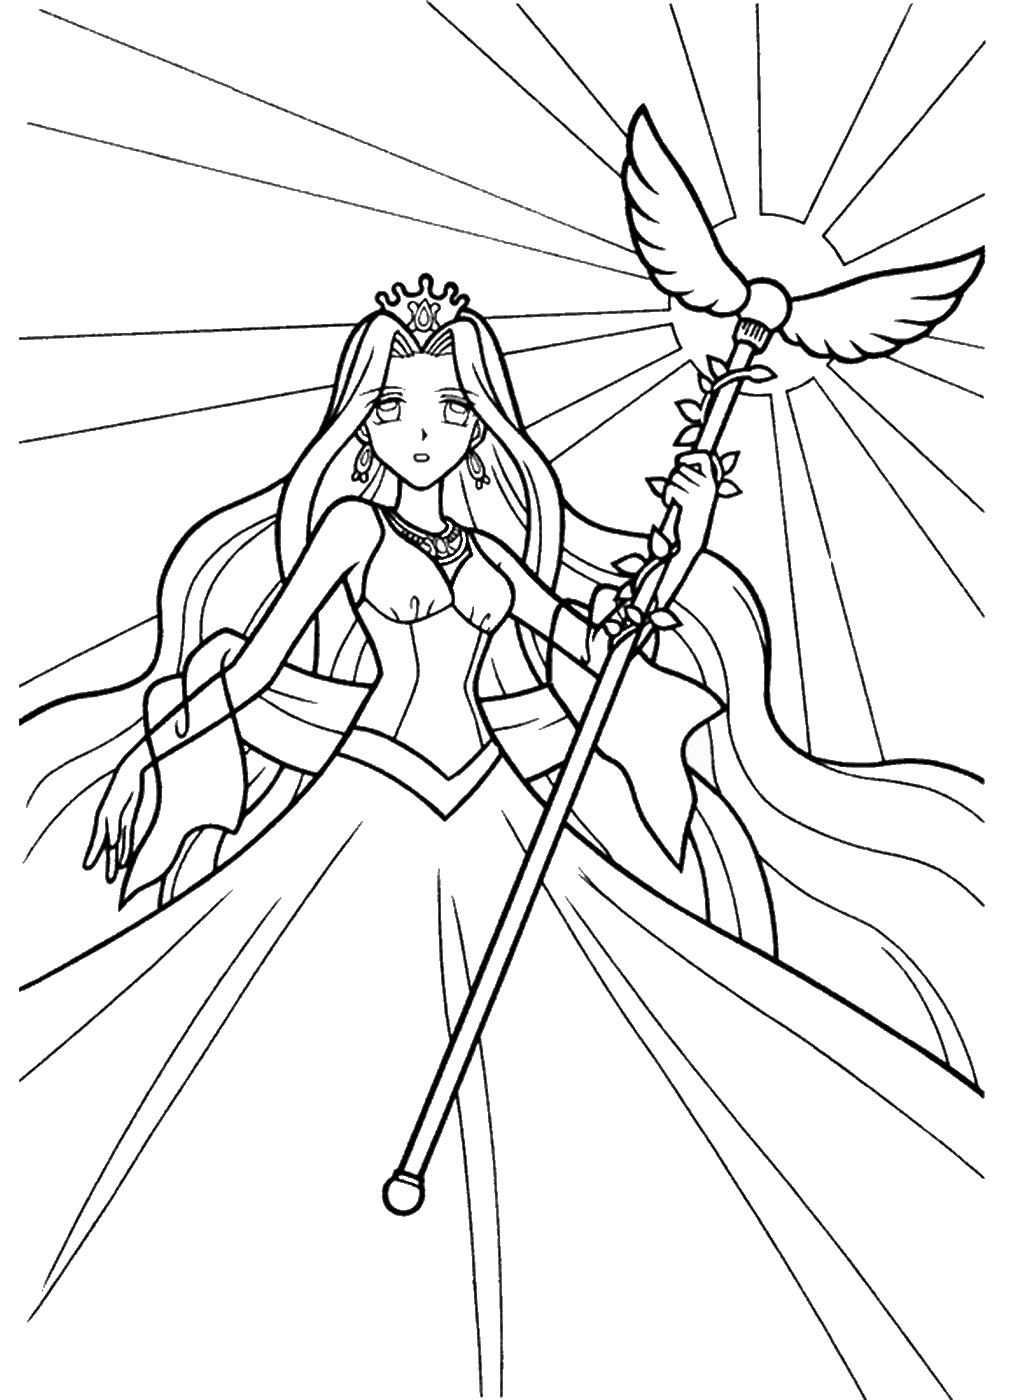 Princess Coloring Pages for Girls princess_cl08 Printable 2021 1106 Coloring4free